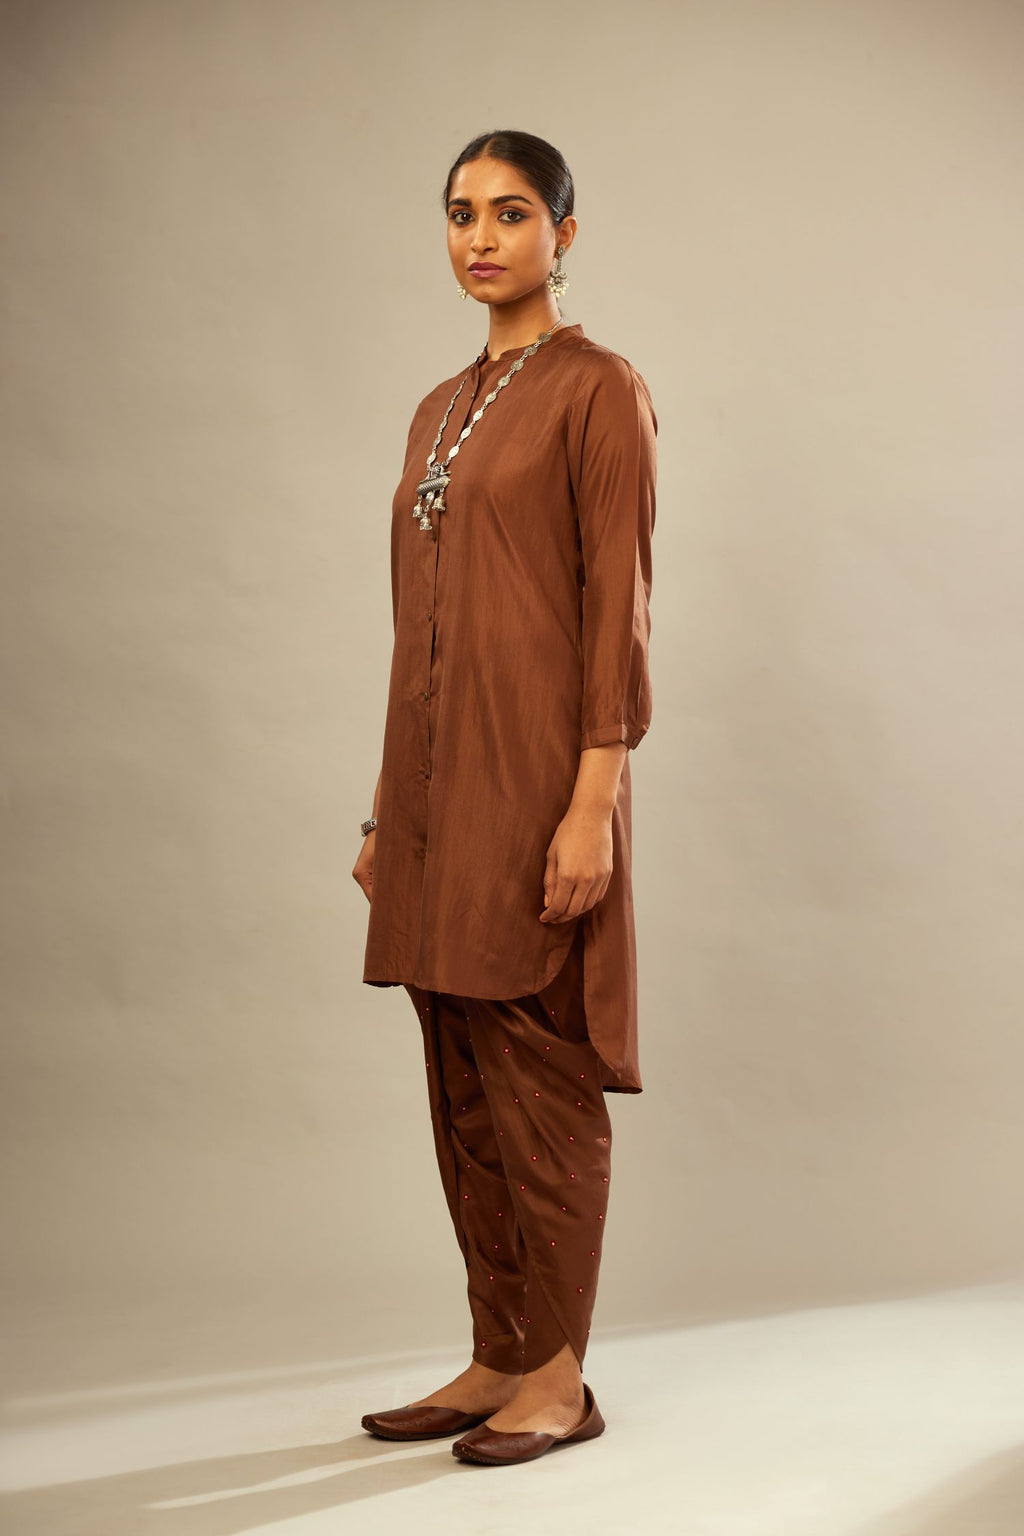 A four piece set in Brown silk comprising of a short kurta with